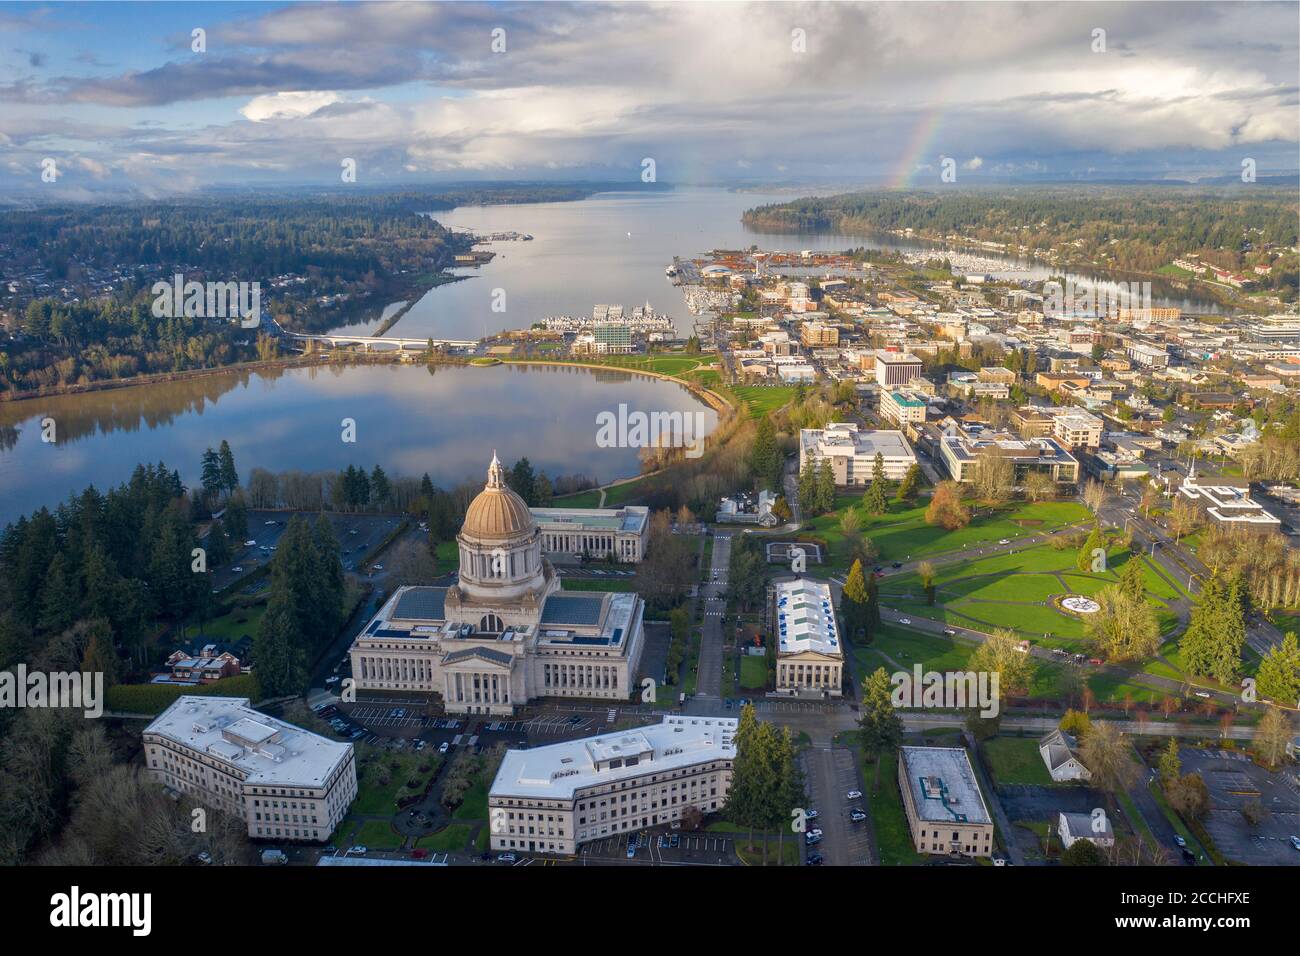 The City of Olympia in Washington State Stock Photo